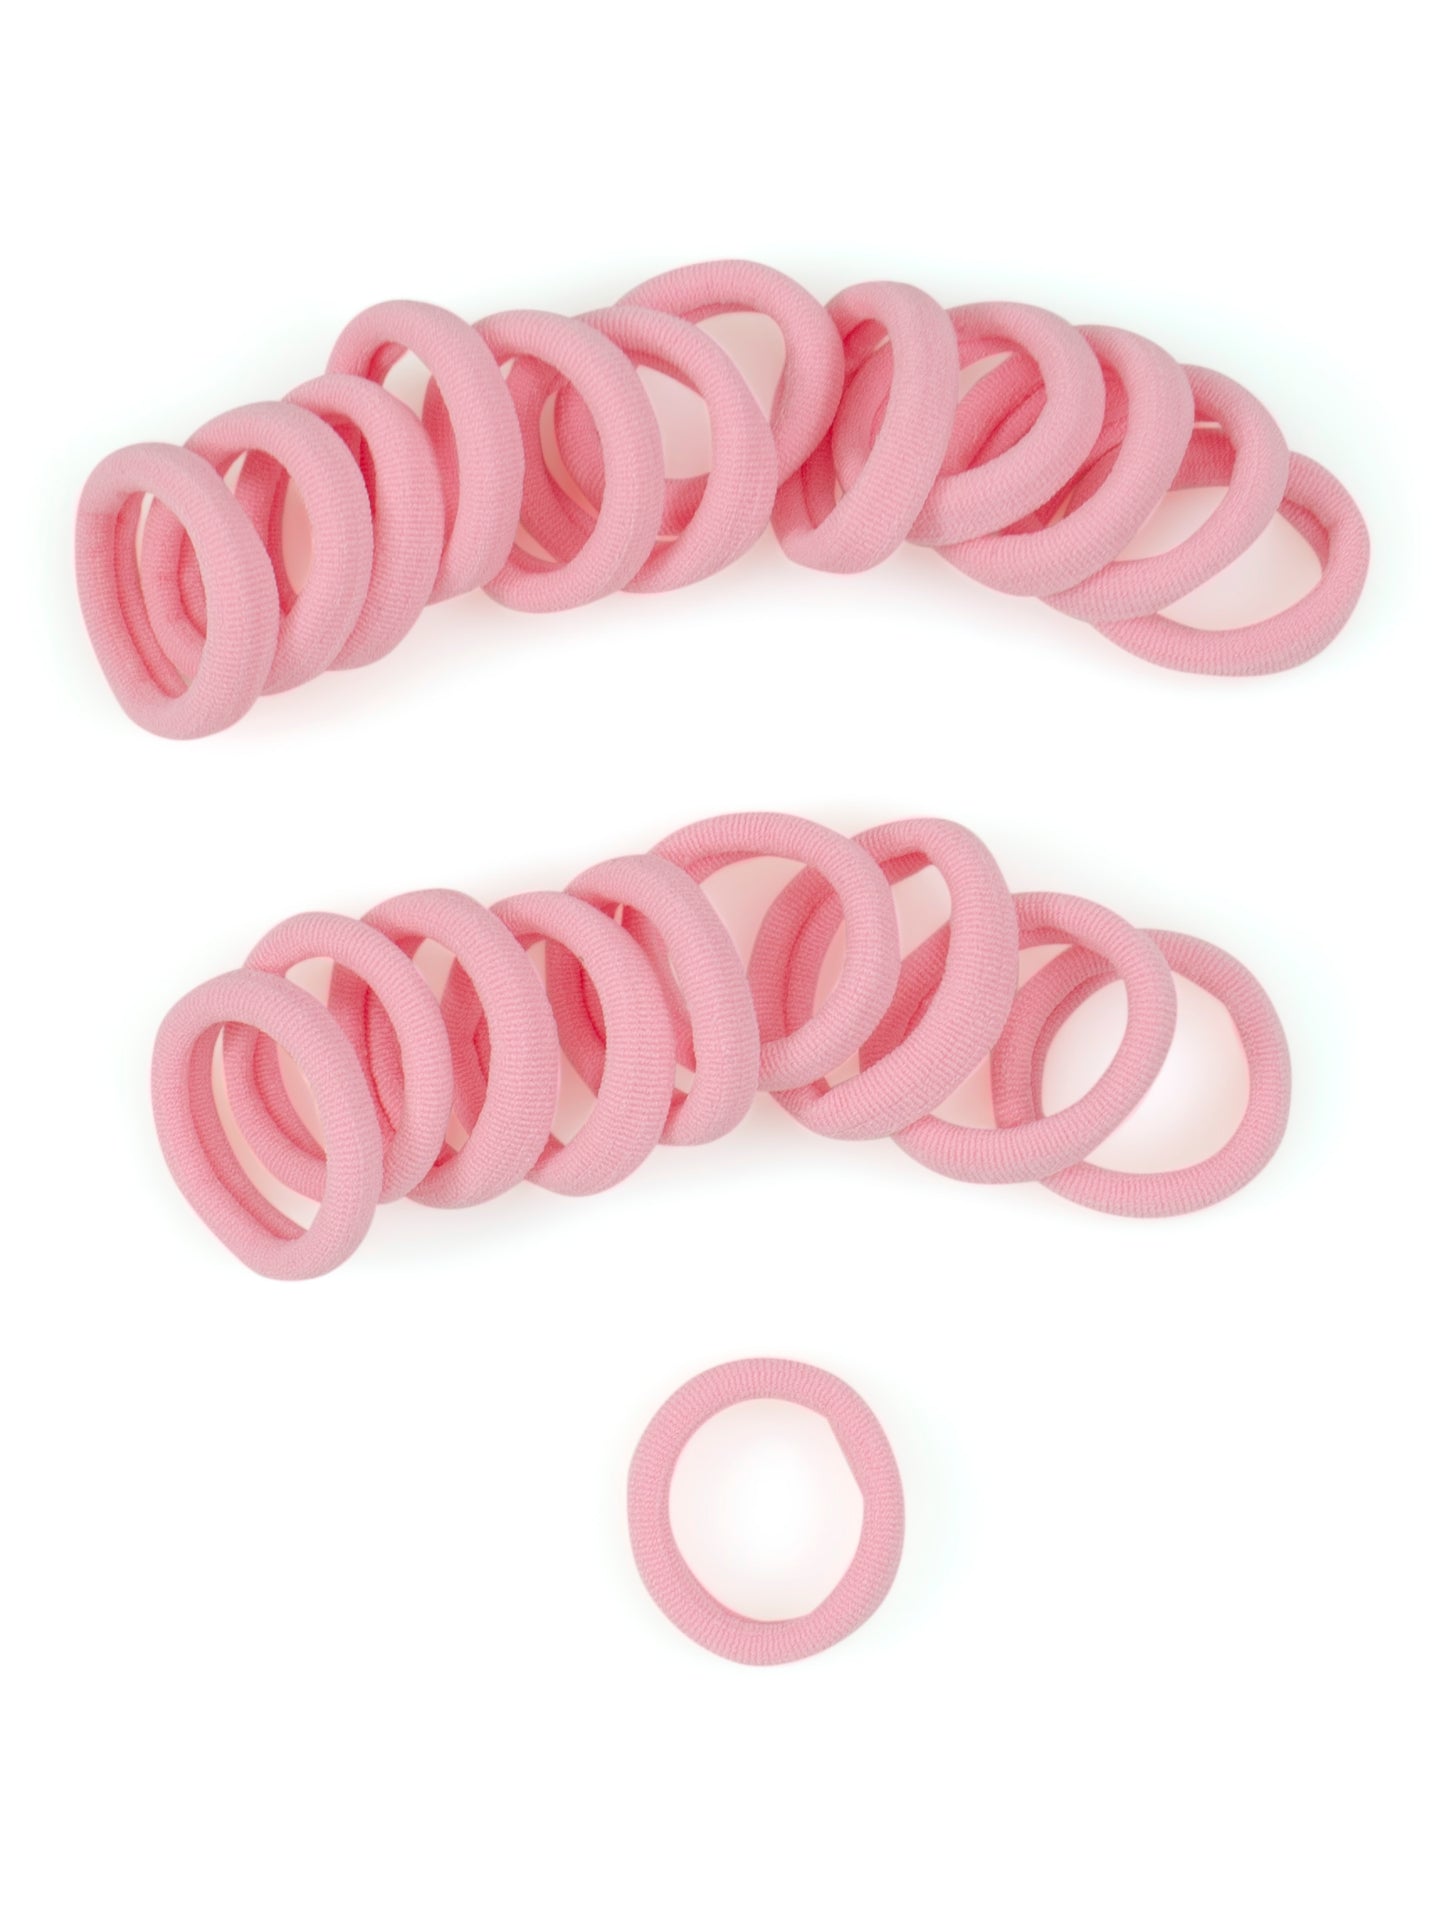 Heliums Small Seamless Hair Ties - 1 Inch Ponytail Holders - 30 Count - Light Pink